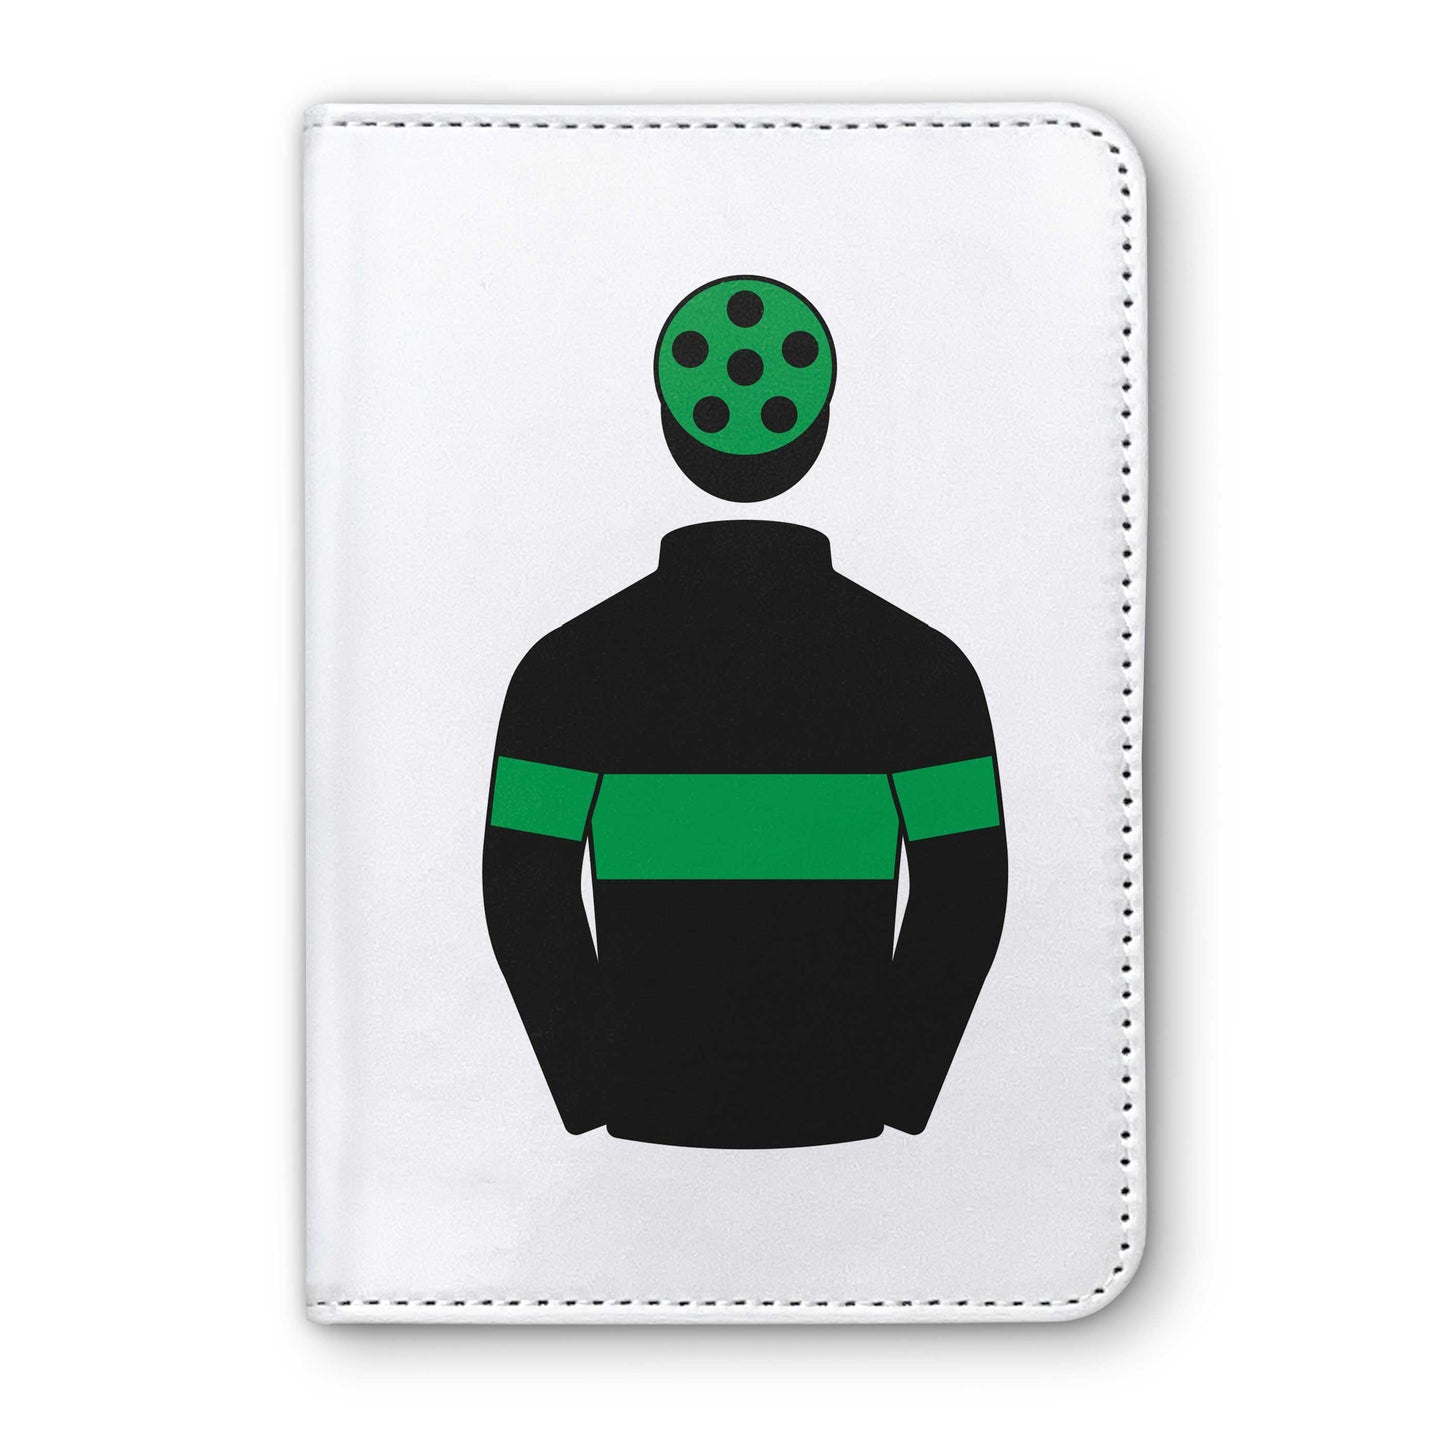 A N Solomons Club Horse Racing Passport Holder - Hacked Up Horse Racing Gifts